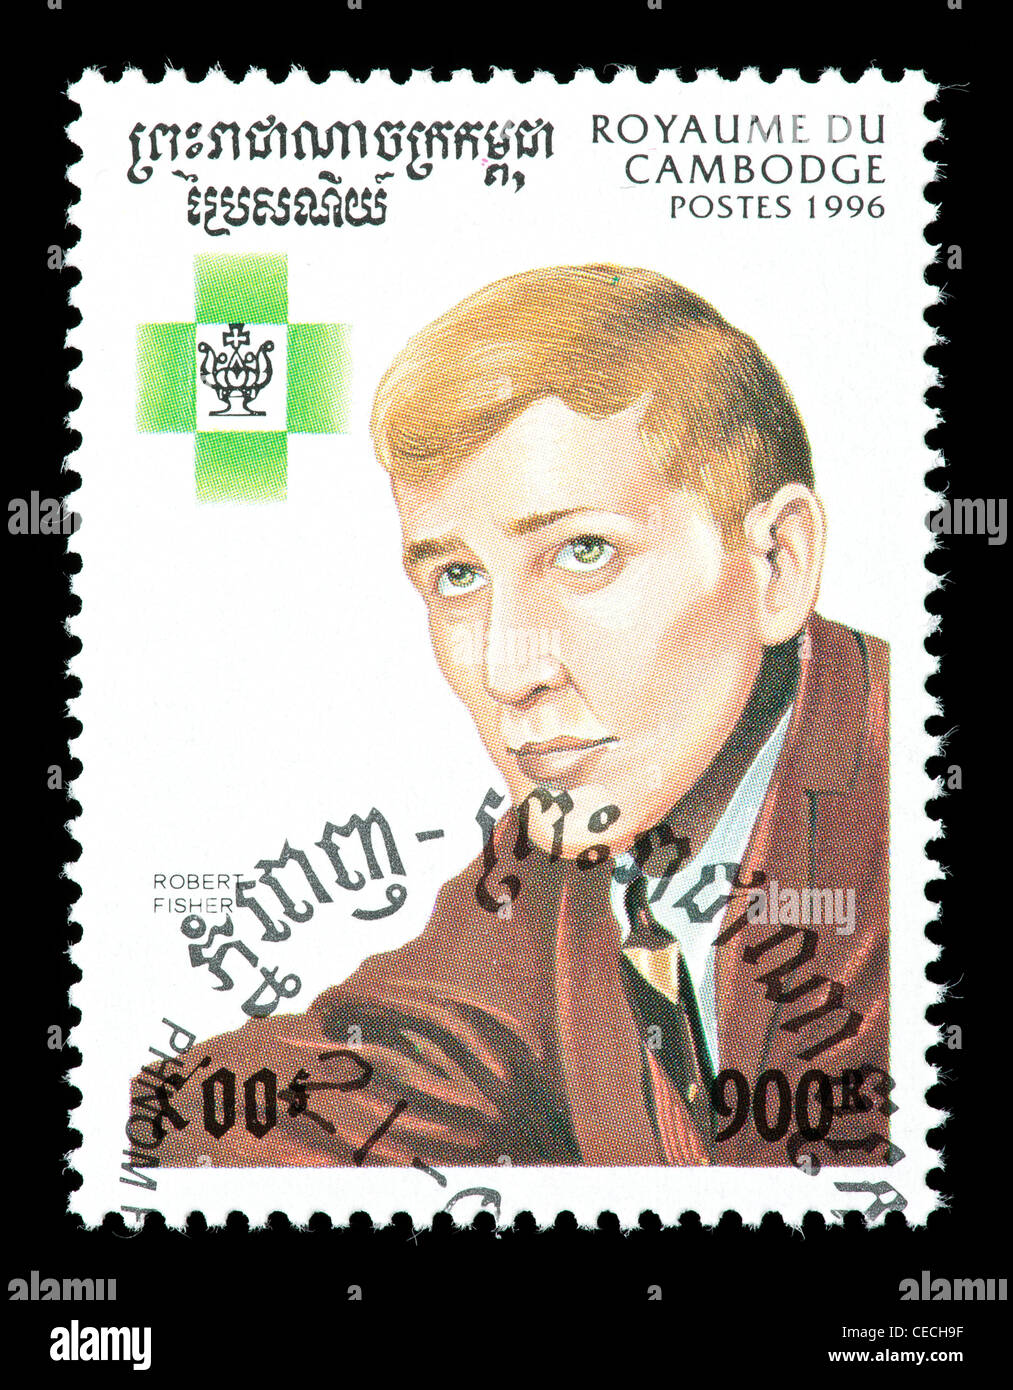 Postage stamp from Cambodia (Kampuchea) depicting Robert James (Bobby) Fischer, former American world chess champion Stock Photo